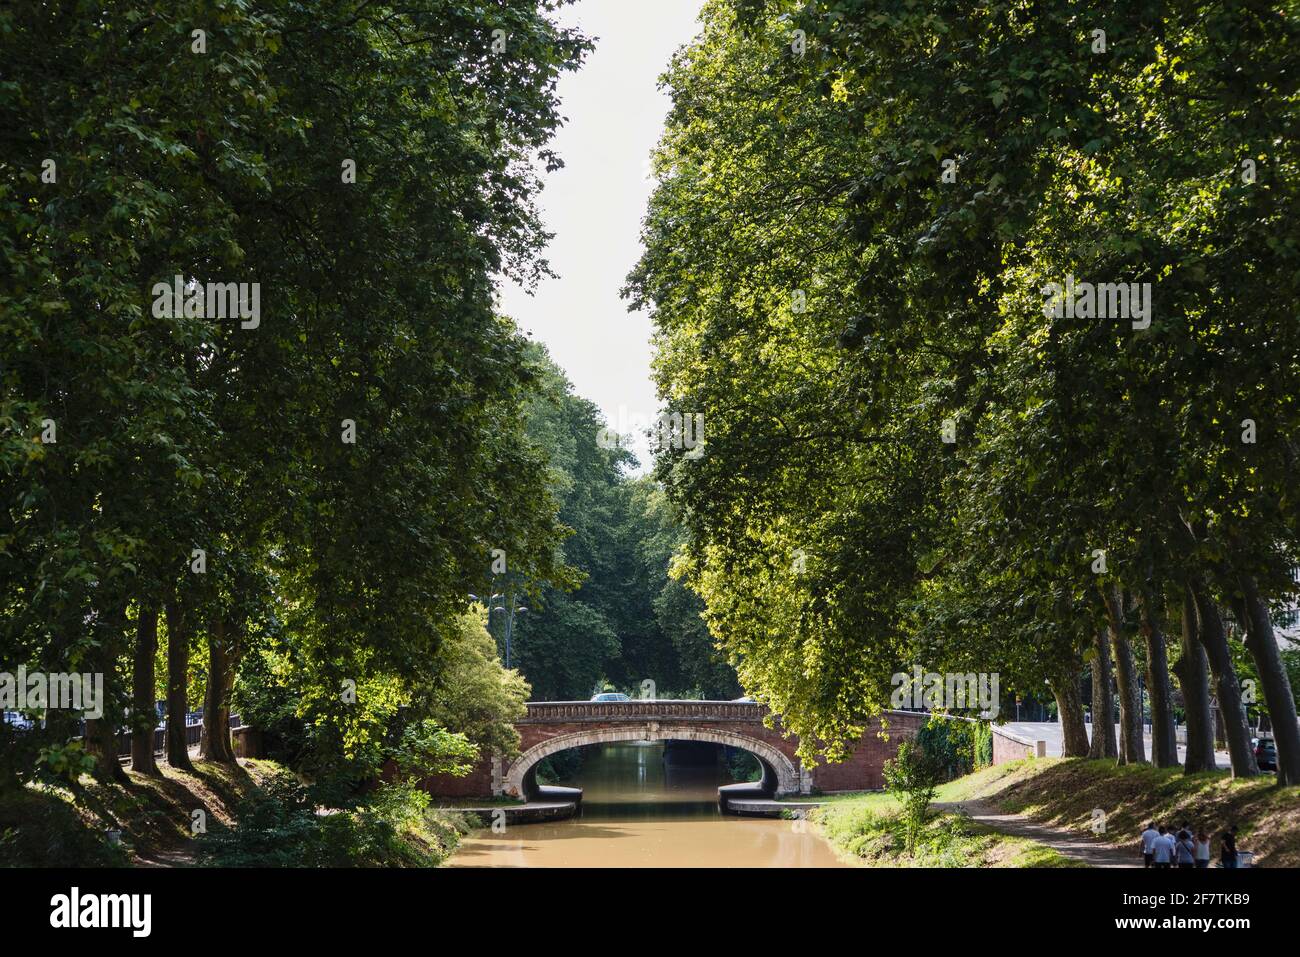 Toulouse, Occitania, France; July 21, 2018: Bridge over the Canal du Midi between the tree-lined banks Stock Photo